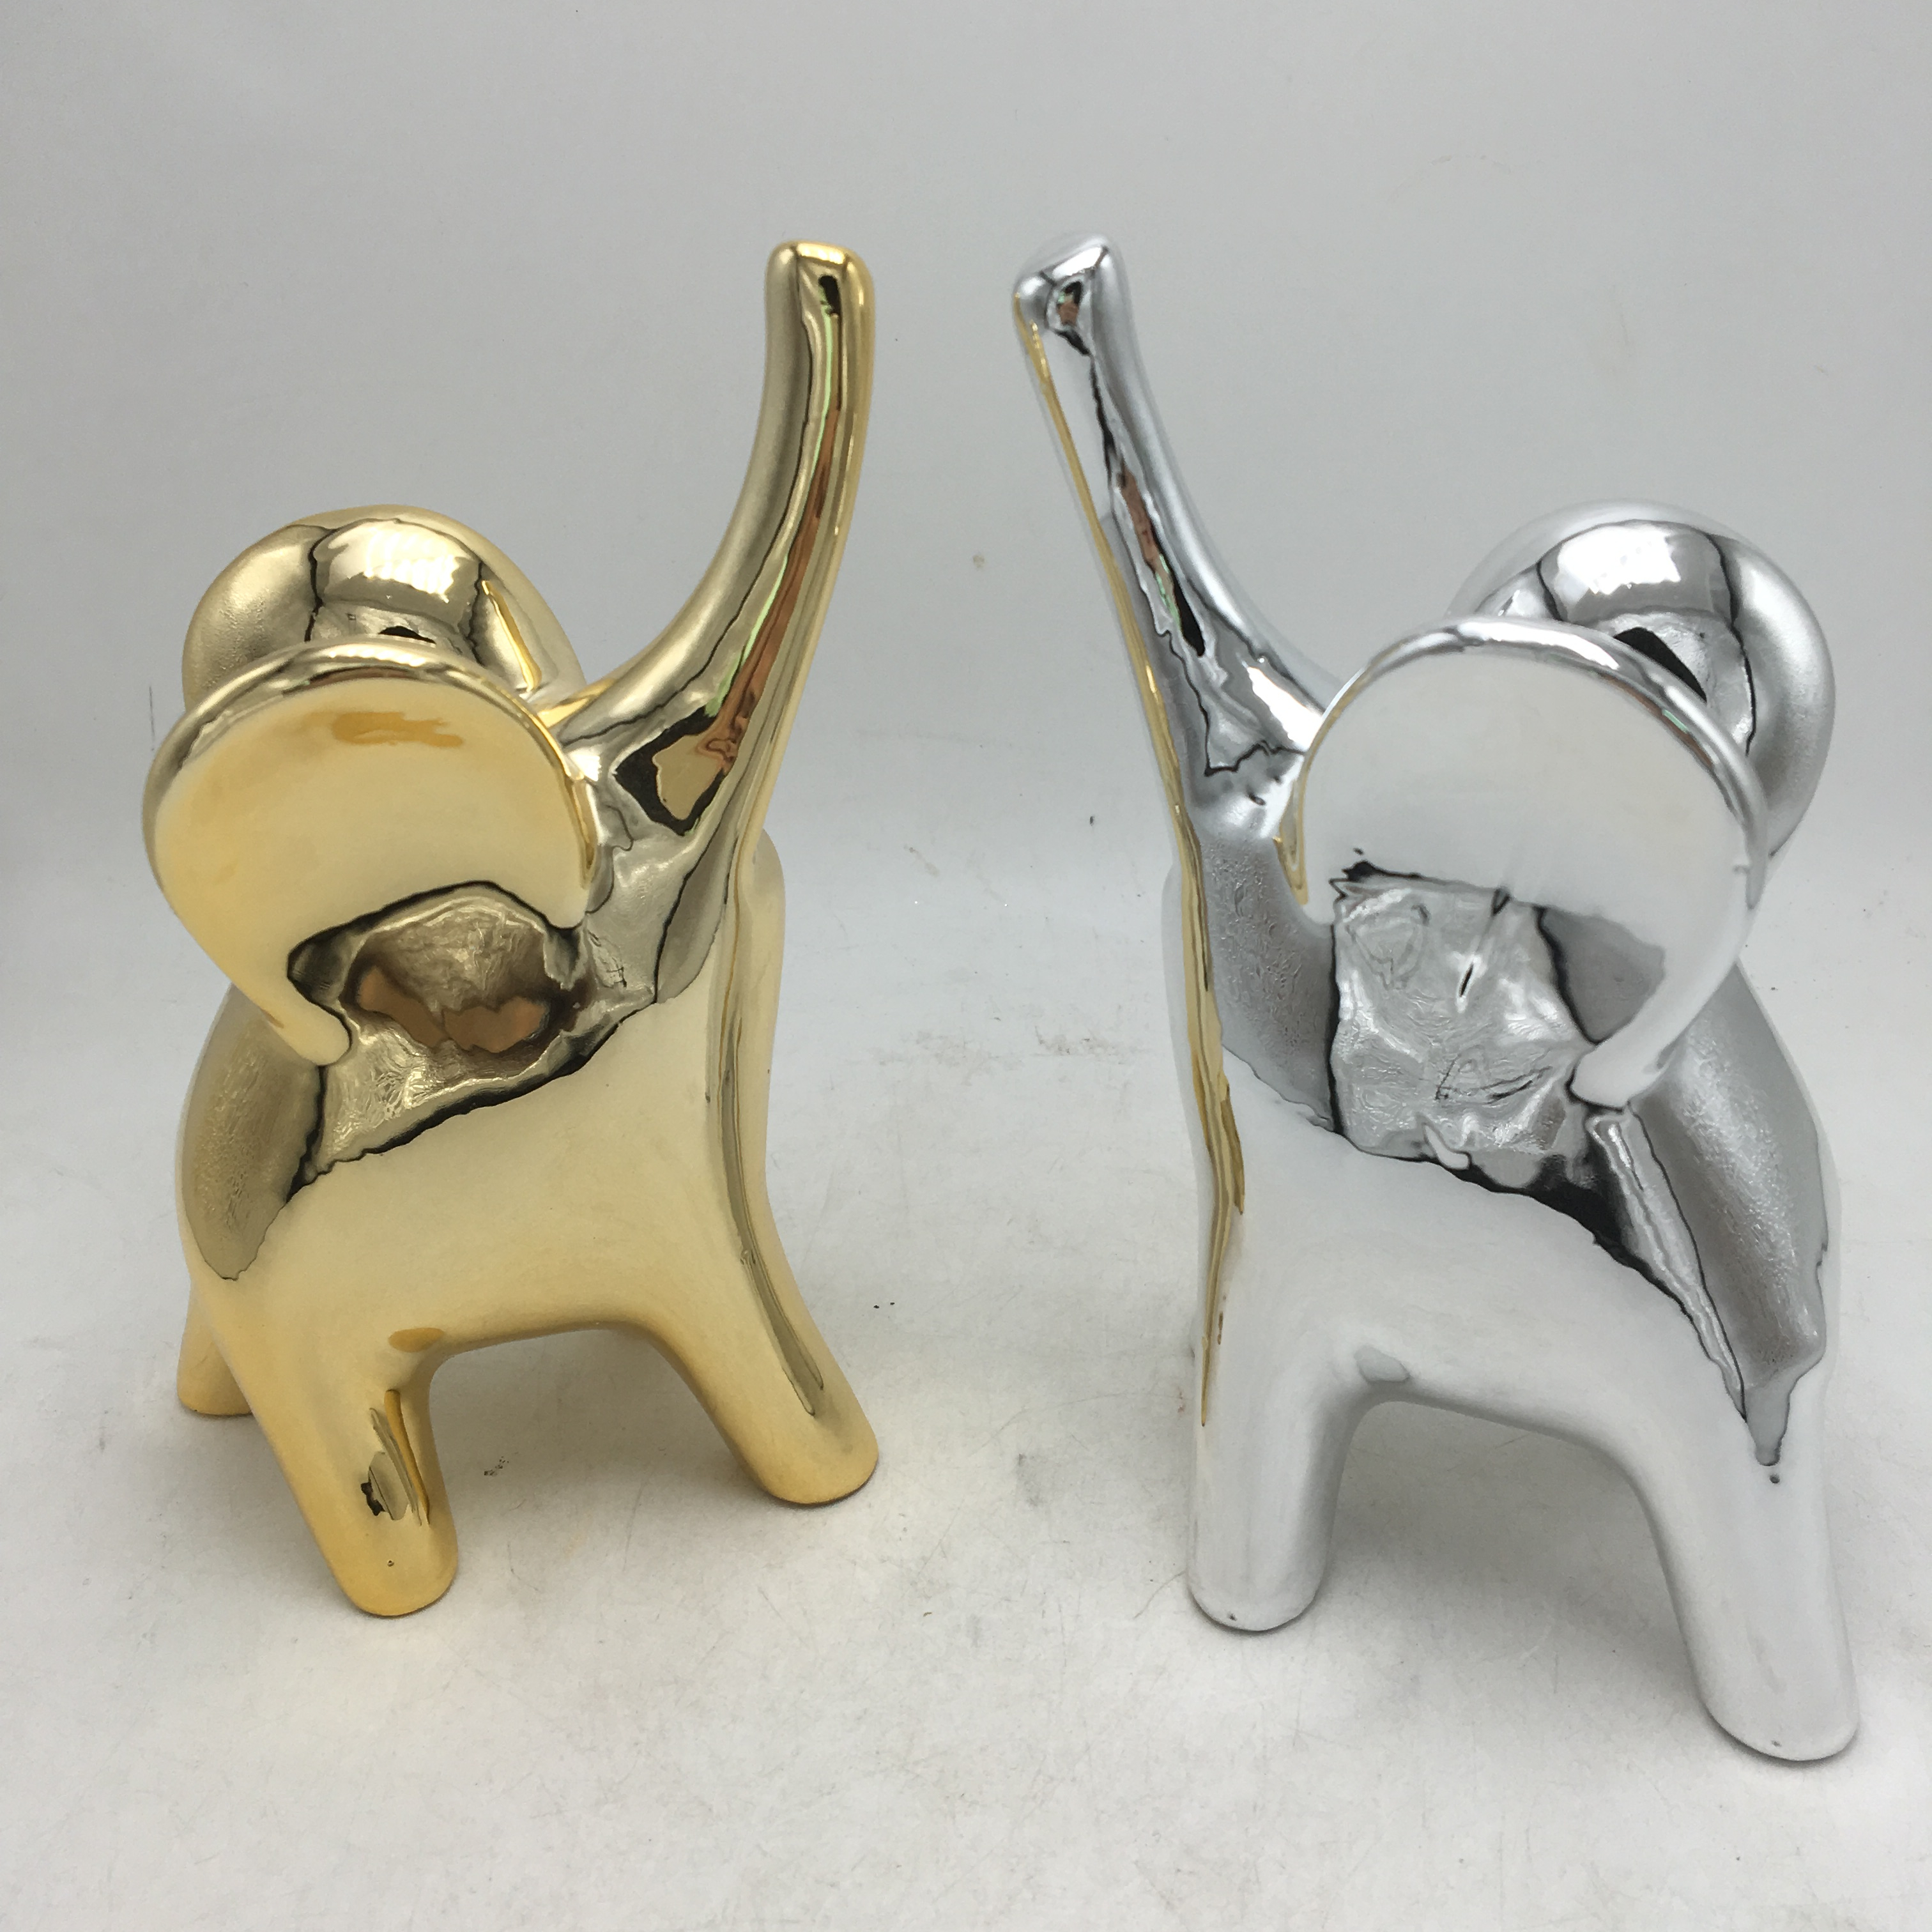 Electroplate Gold and Sliver Elephant Coin bank, Piggy Bank, Money box